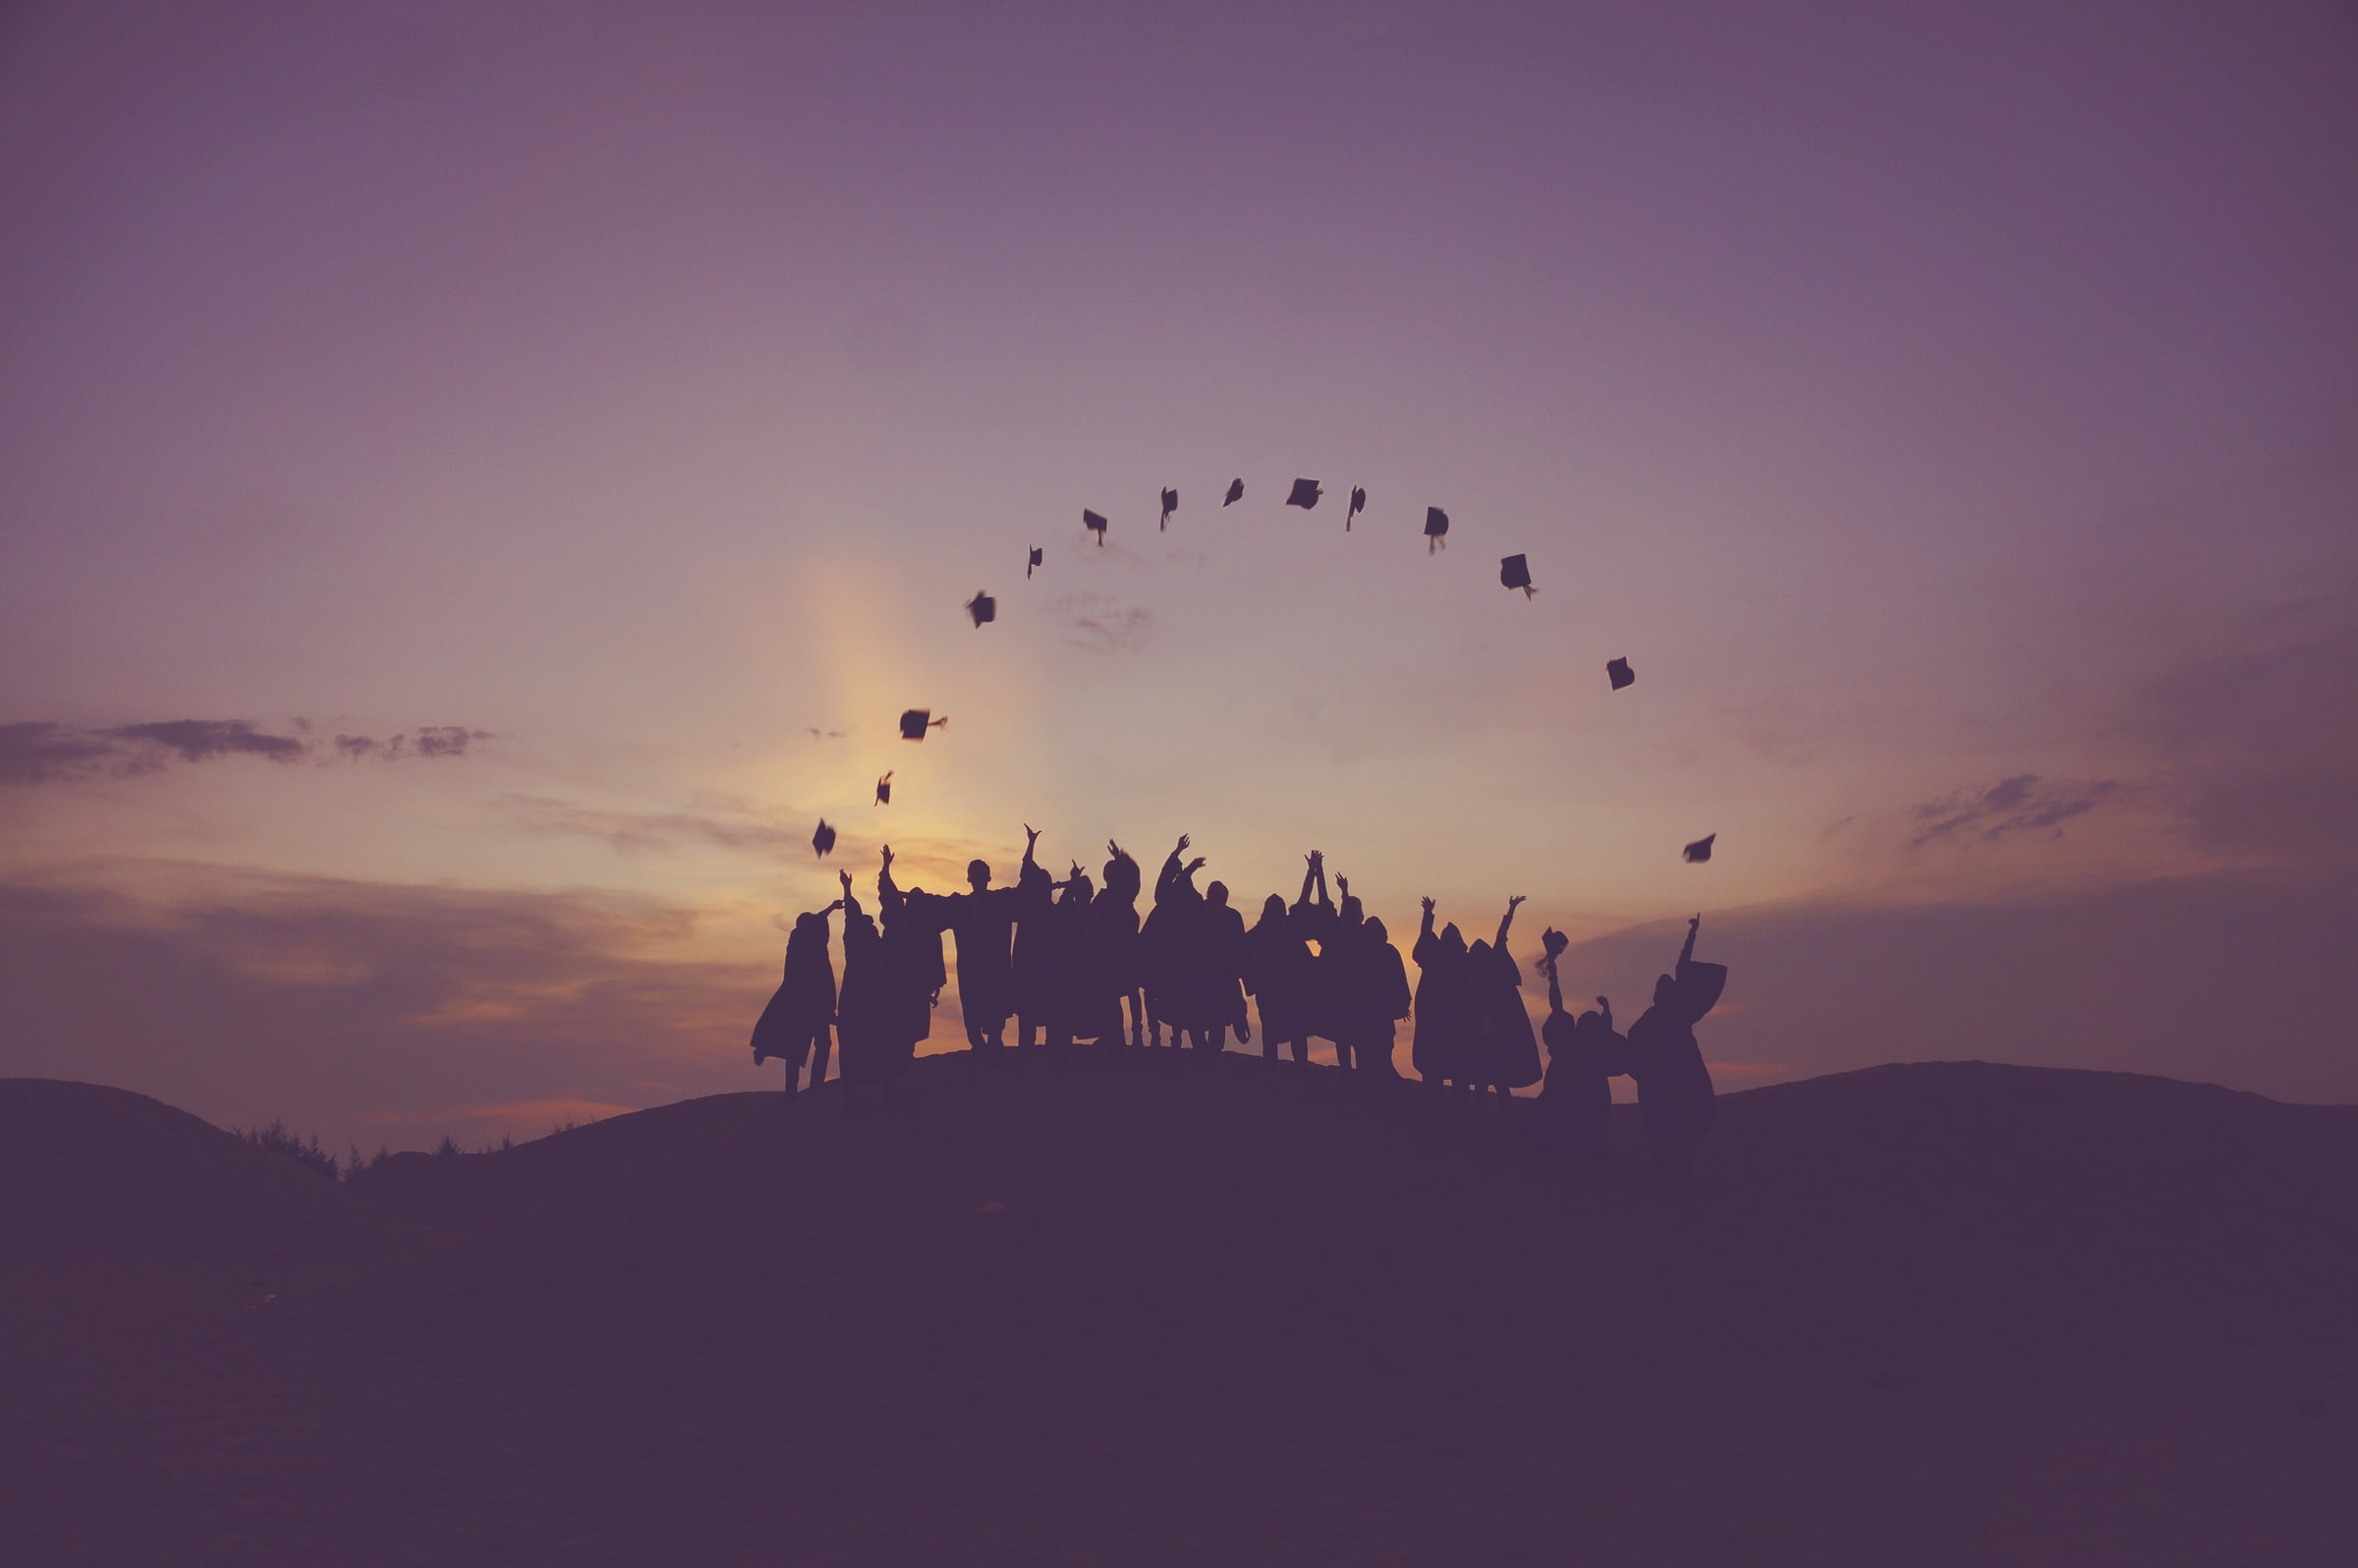 A silhouette of a group of graduates in gowns throwing their caps up in the air in front of a sunset.